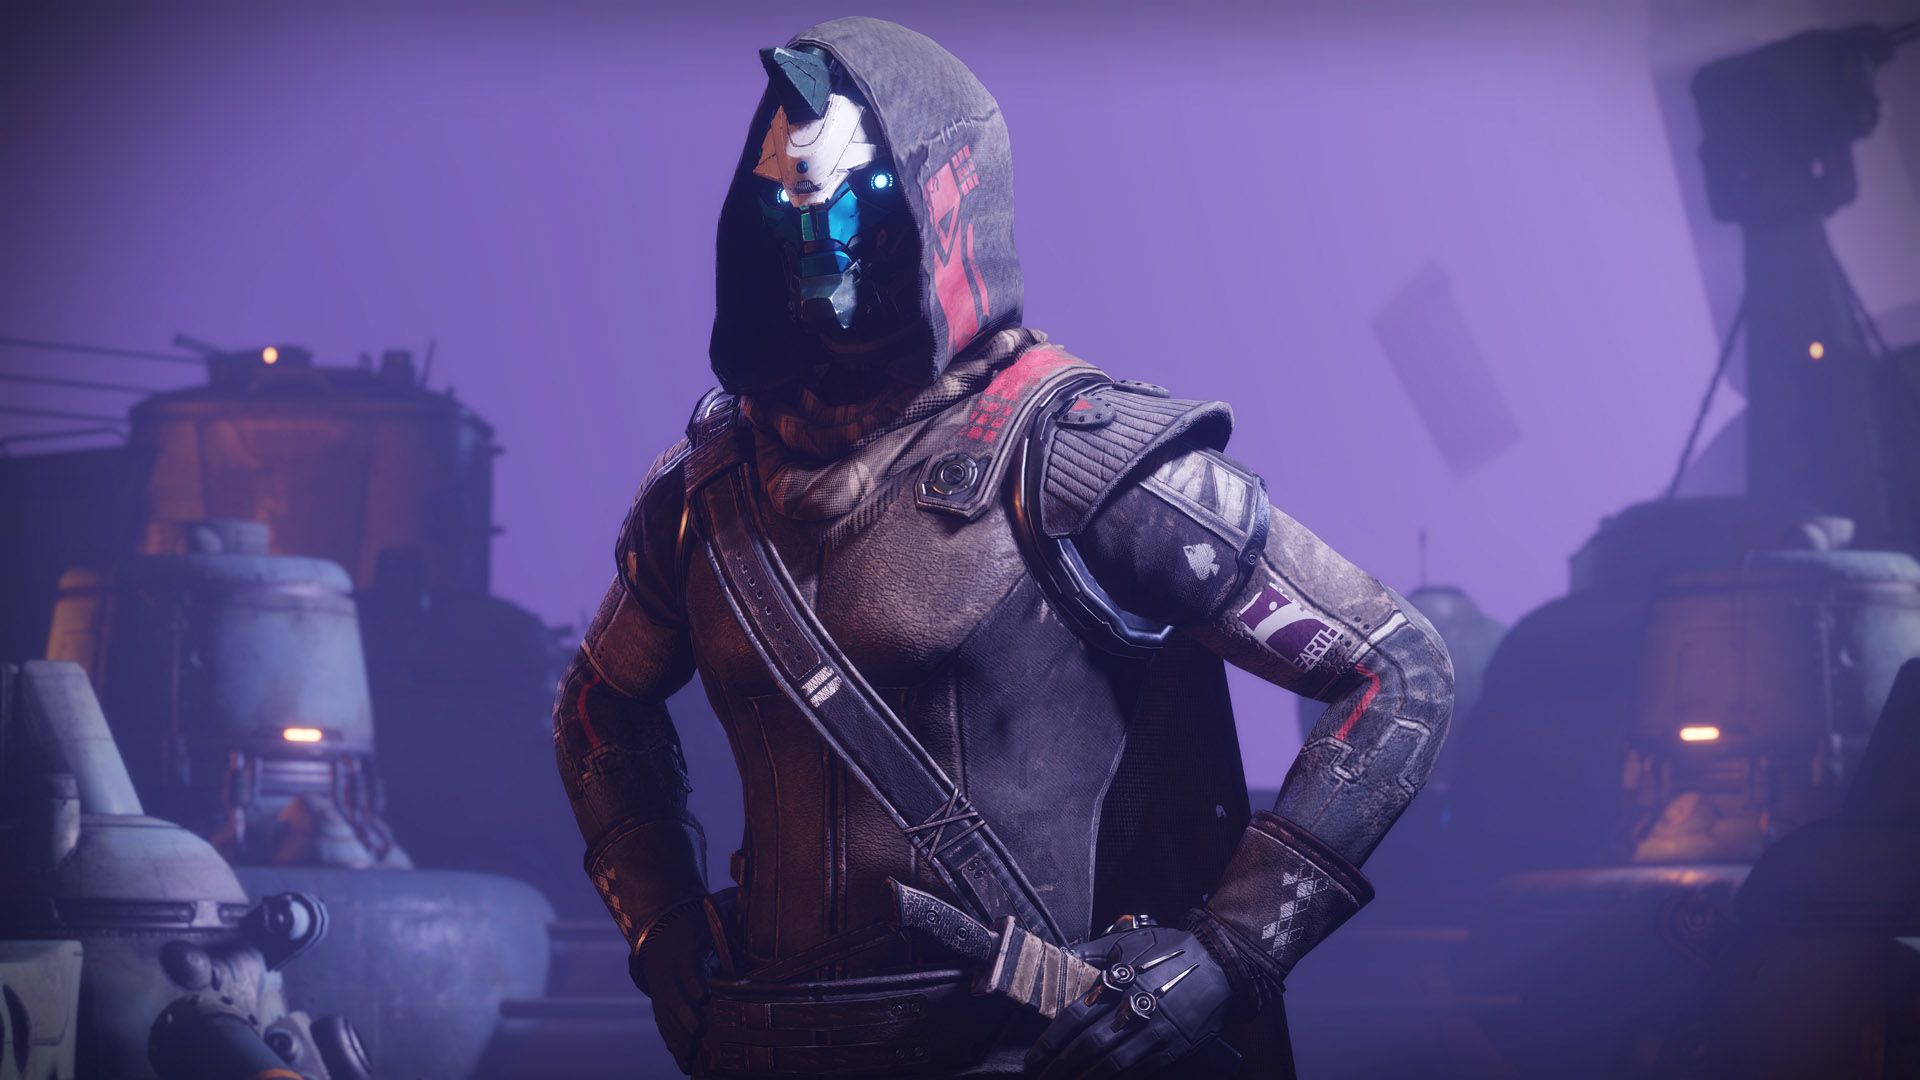 Destiny 2 won't support the Steam Deck, Bungie threatens to ban players who use it photo 1